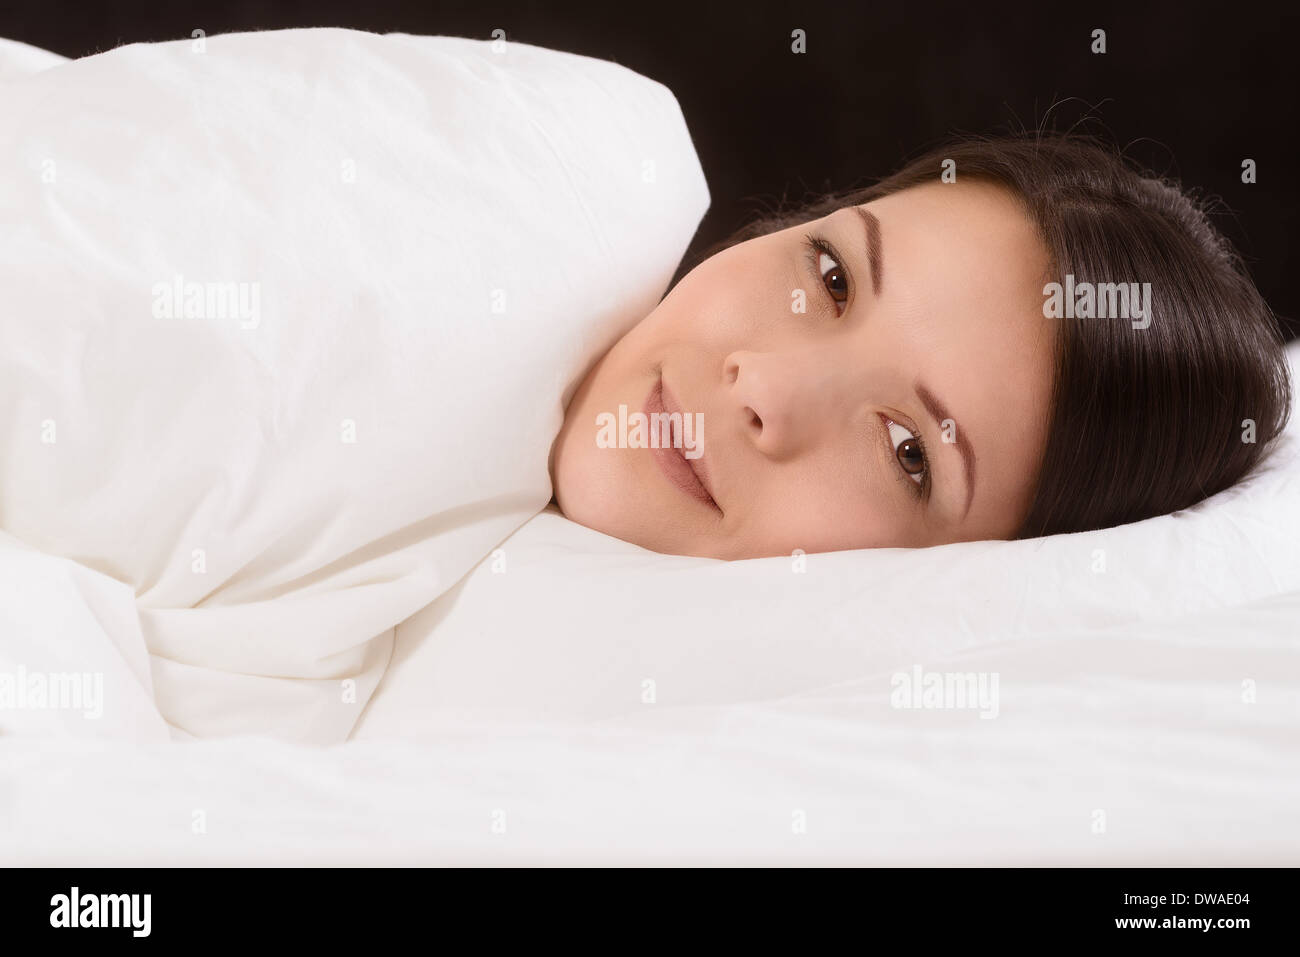 Attractive young woman enjoying a peaceful sleep tucked up in bed dreaming with a serene expression Stock Photo